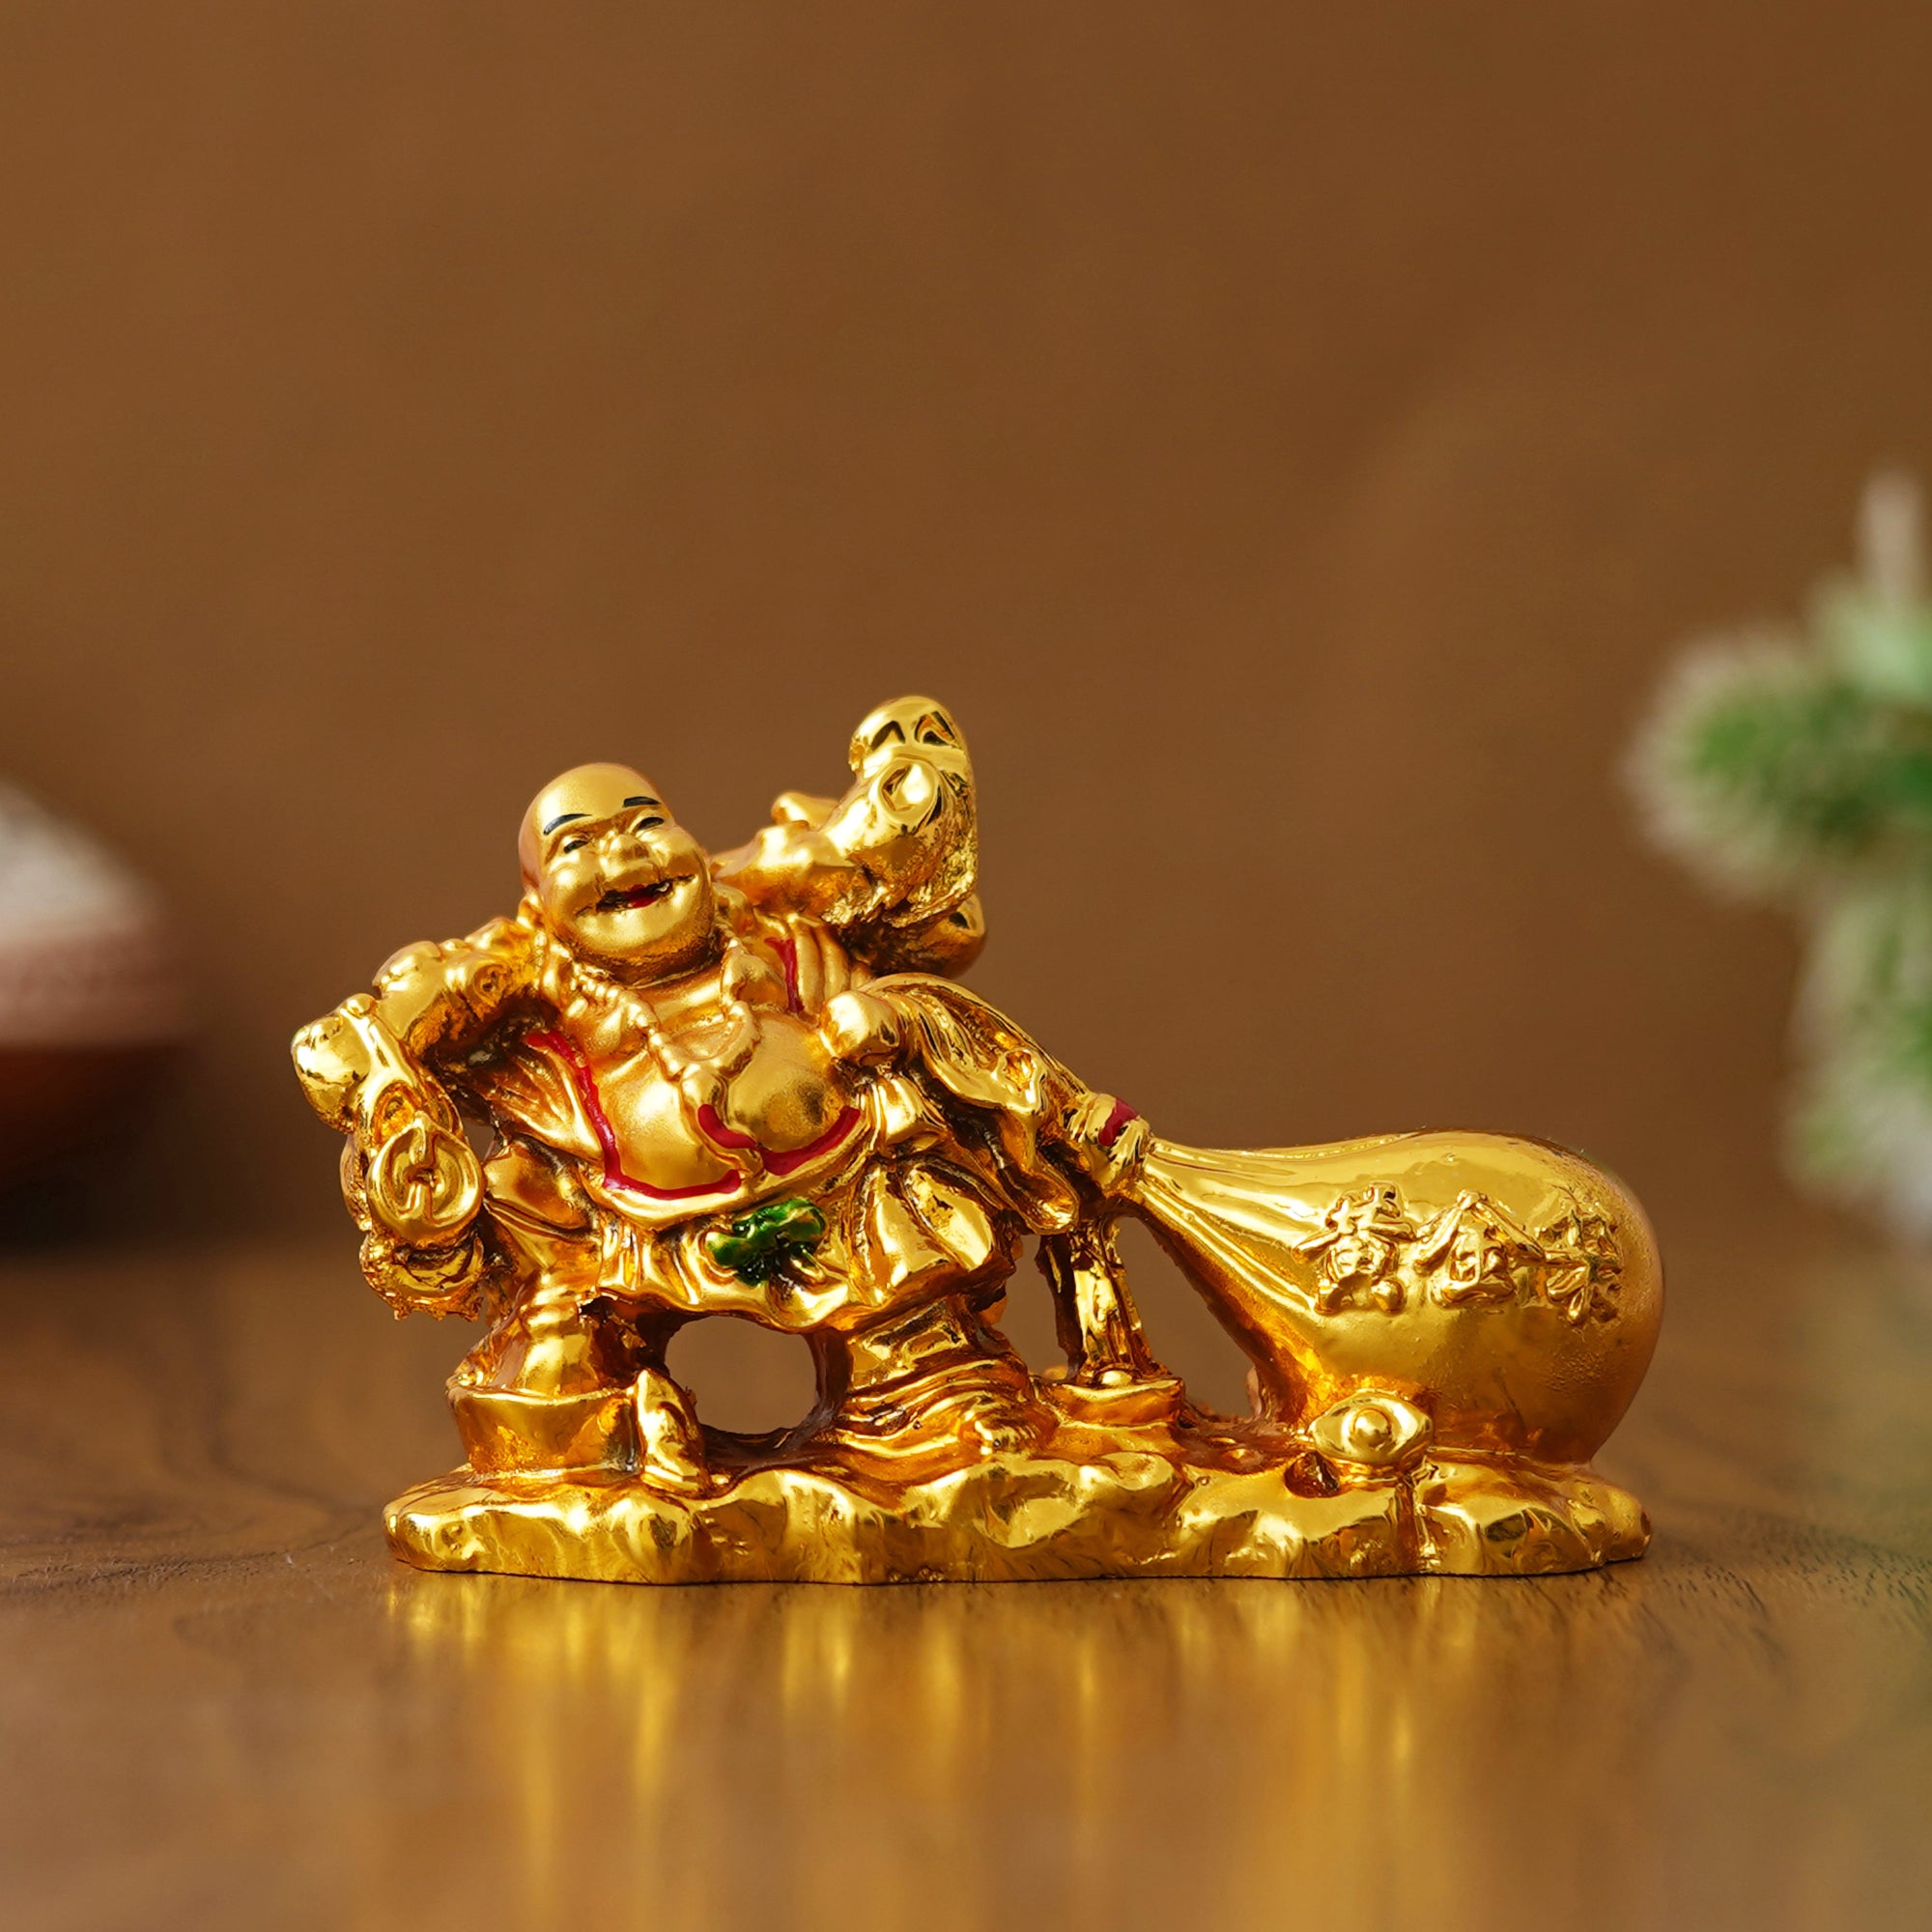 eCraftIndia Golden Polyresin Feng Shui Laughing Buddha Idol with Money Bag For Wealth And Good Luck 4